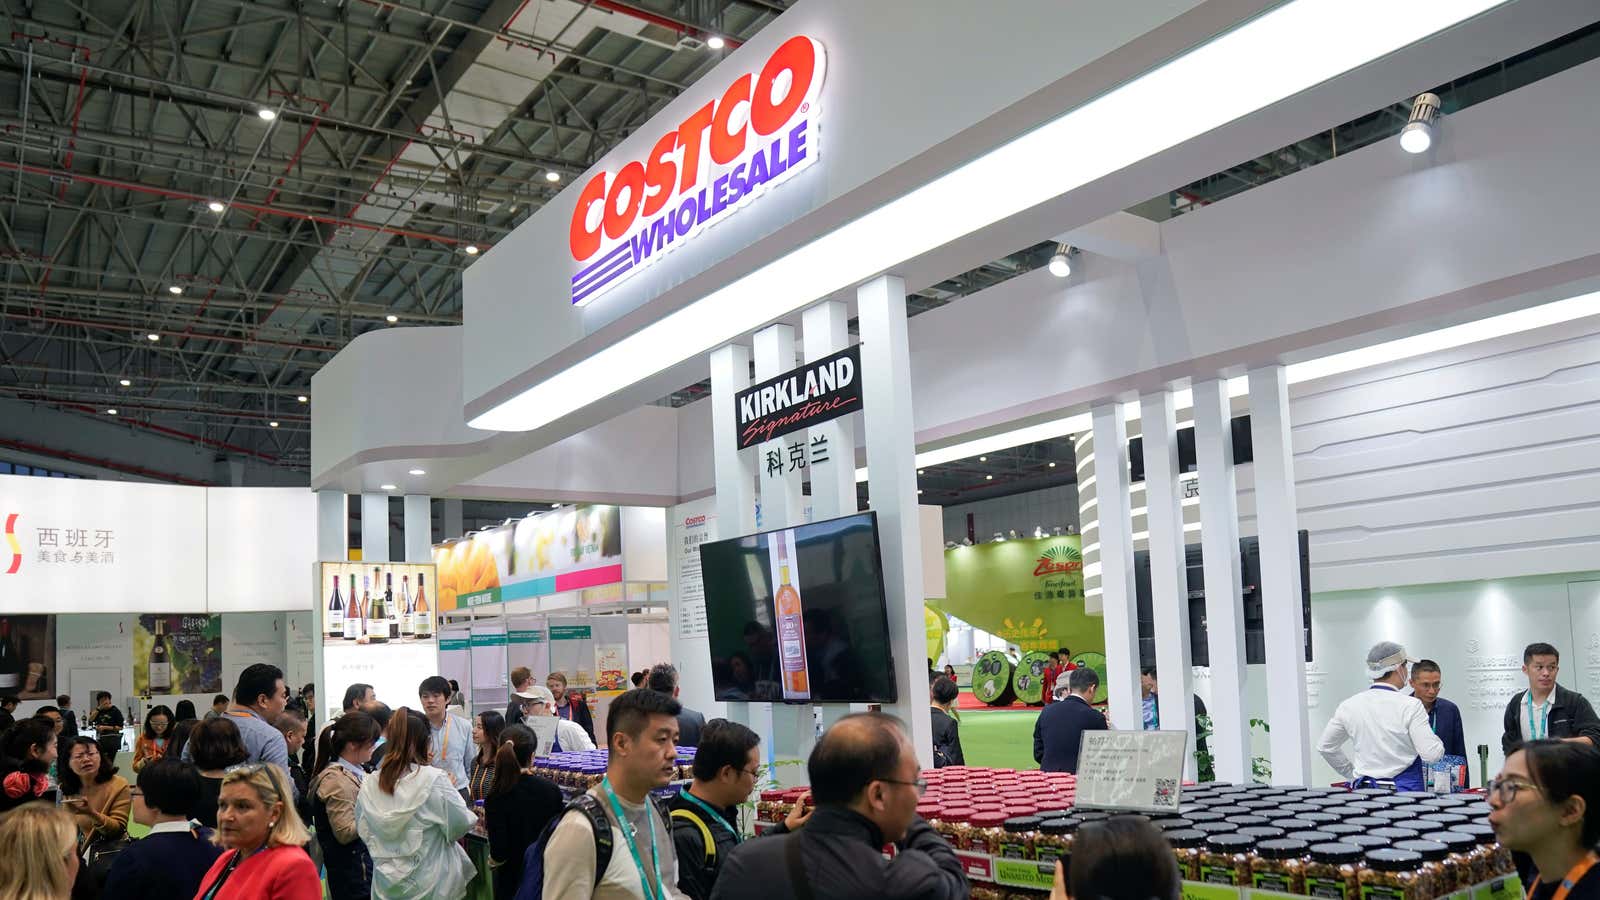 Costco’s booth at a trade expo in Shanghai last year.